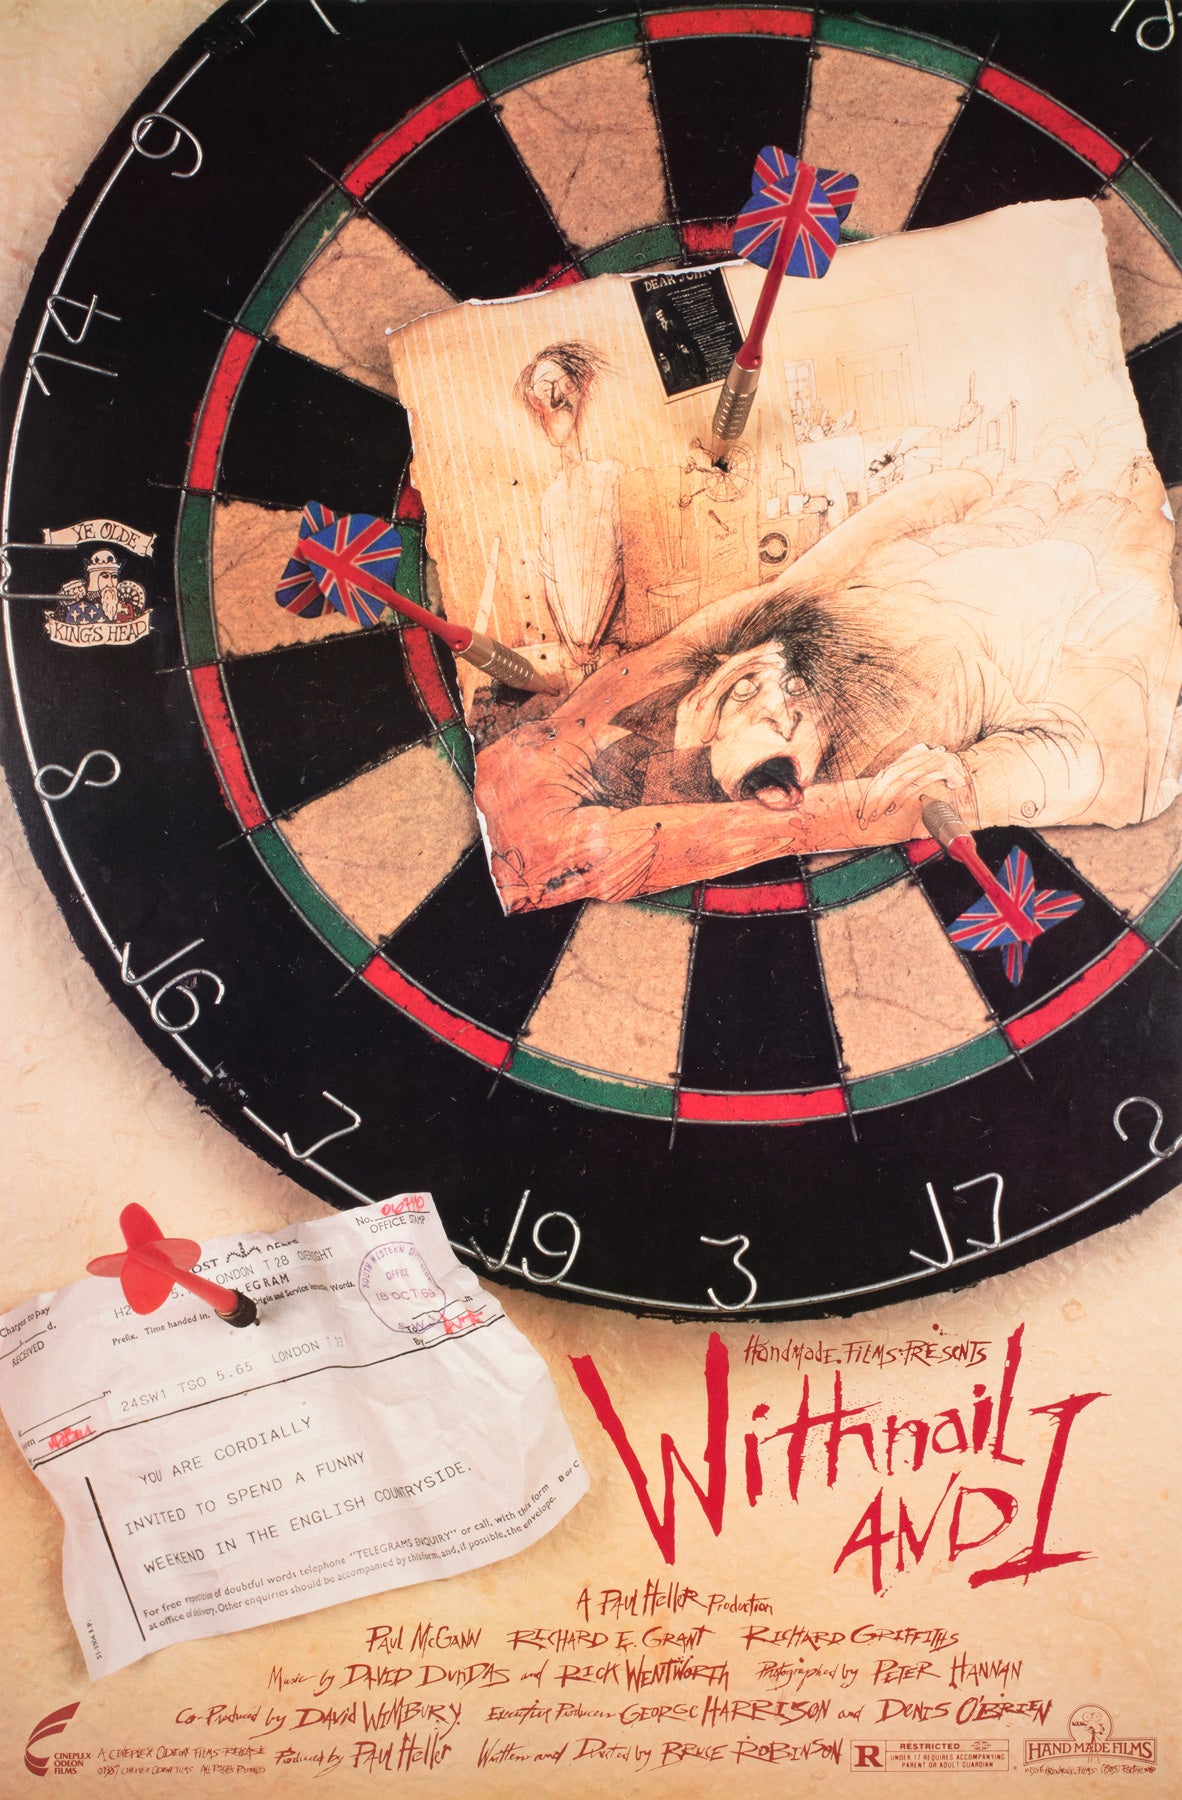 Withnail and I 1987 US 1 Sheet Film Movie Poster, Ralph Steadman